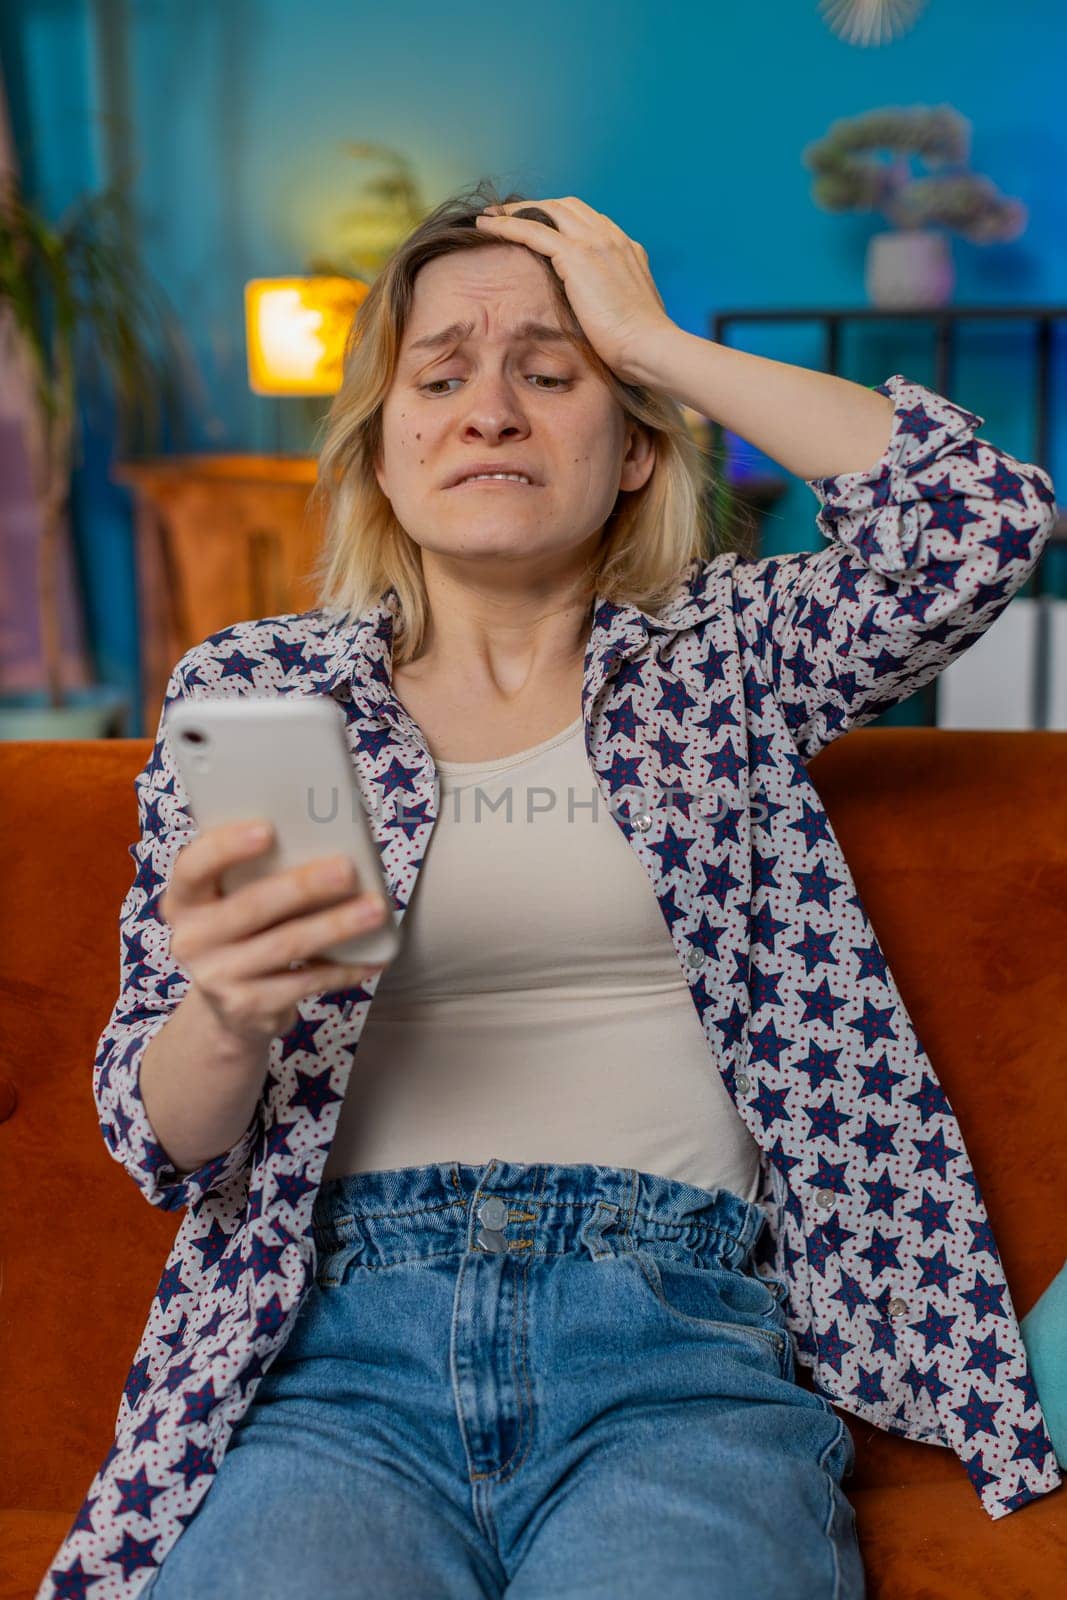 Shocked sad amazed woman using smartphone reading negative message feels annoyed sitting on couch in living room at home. Upset Caucasian girl having gadget trouble in apartment. App crash concept